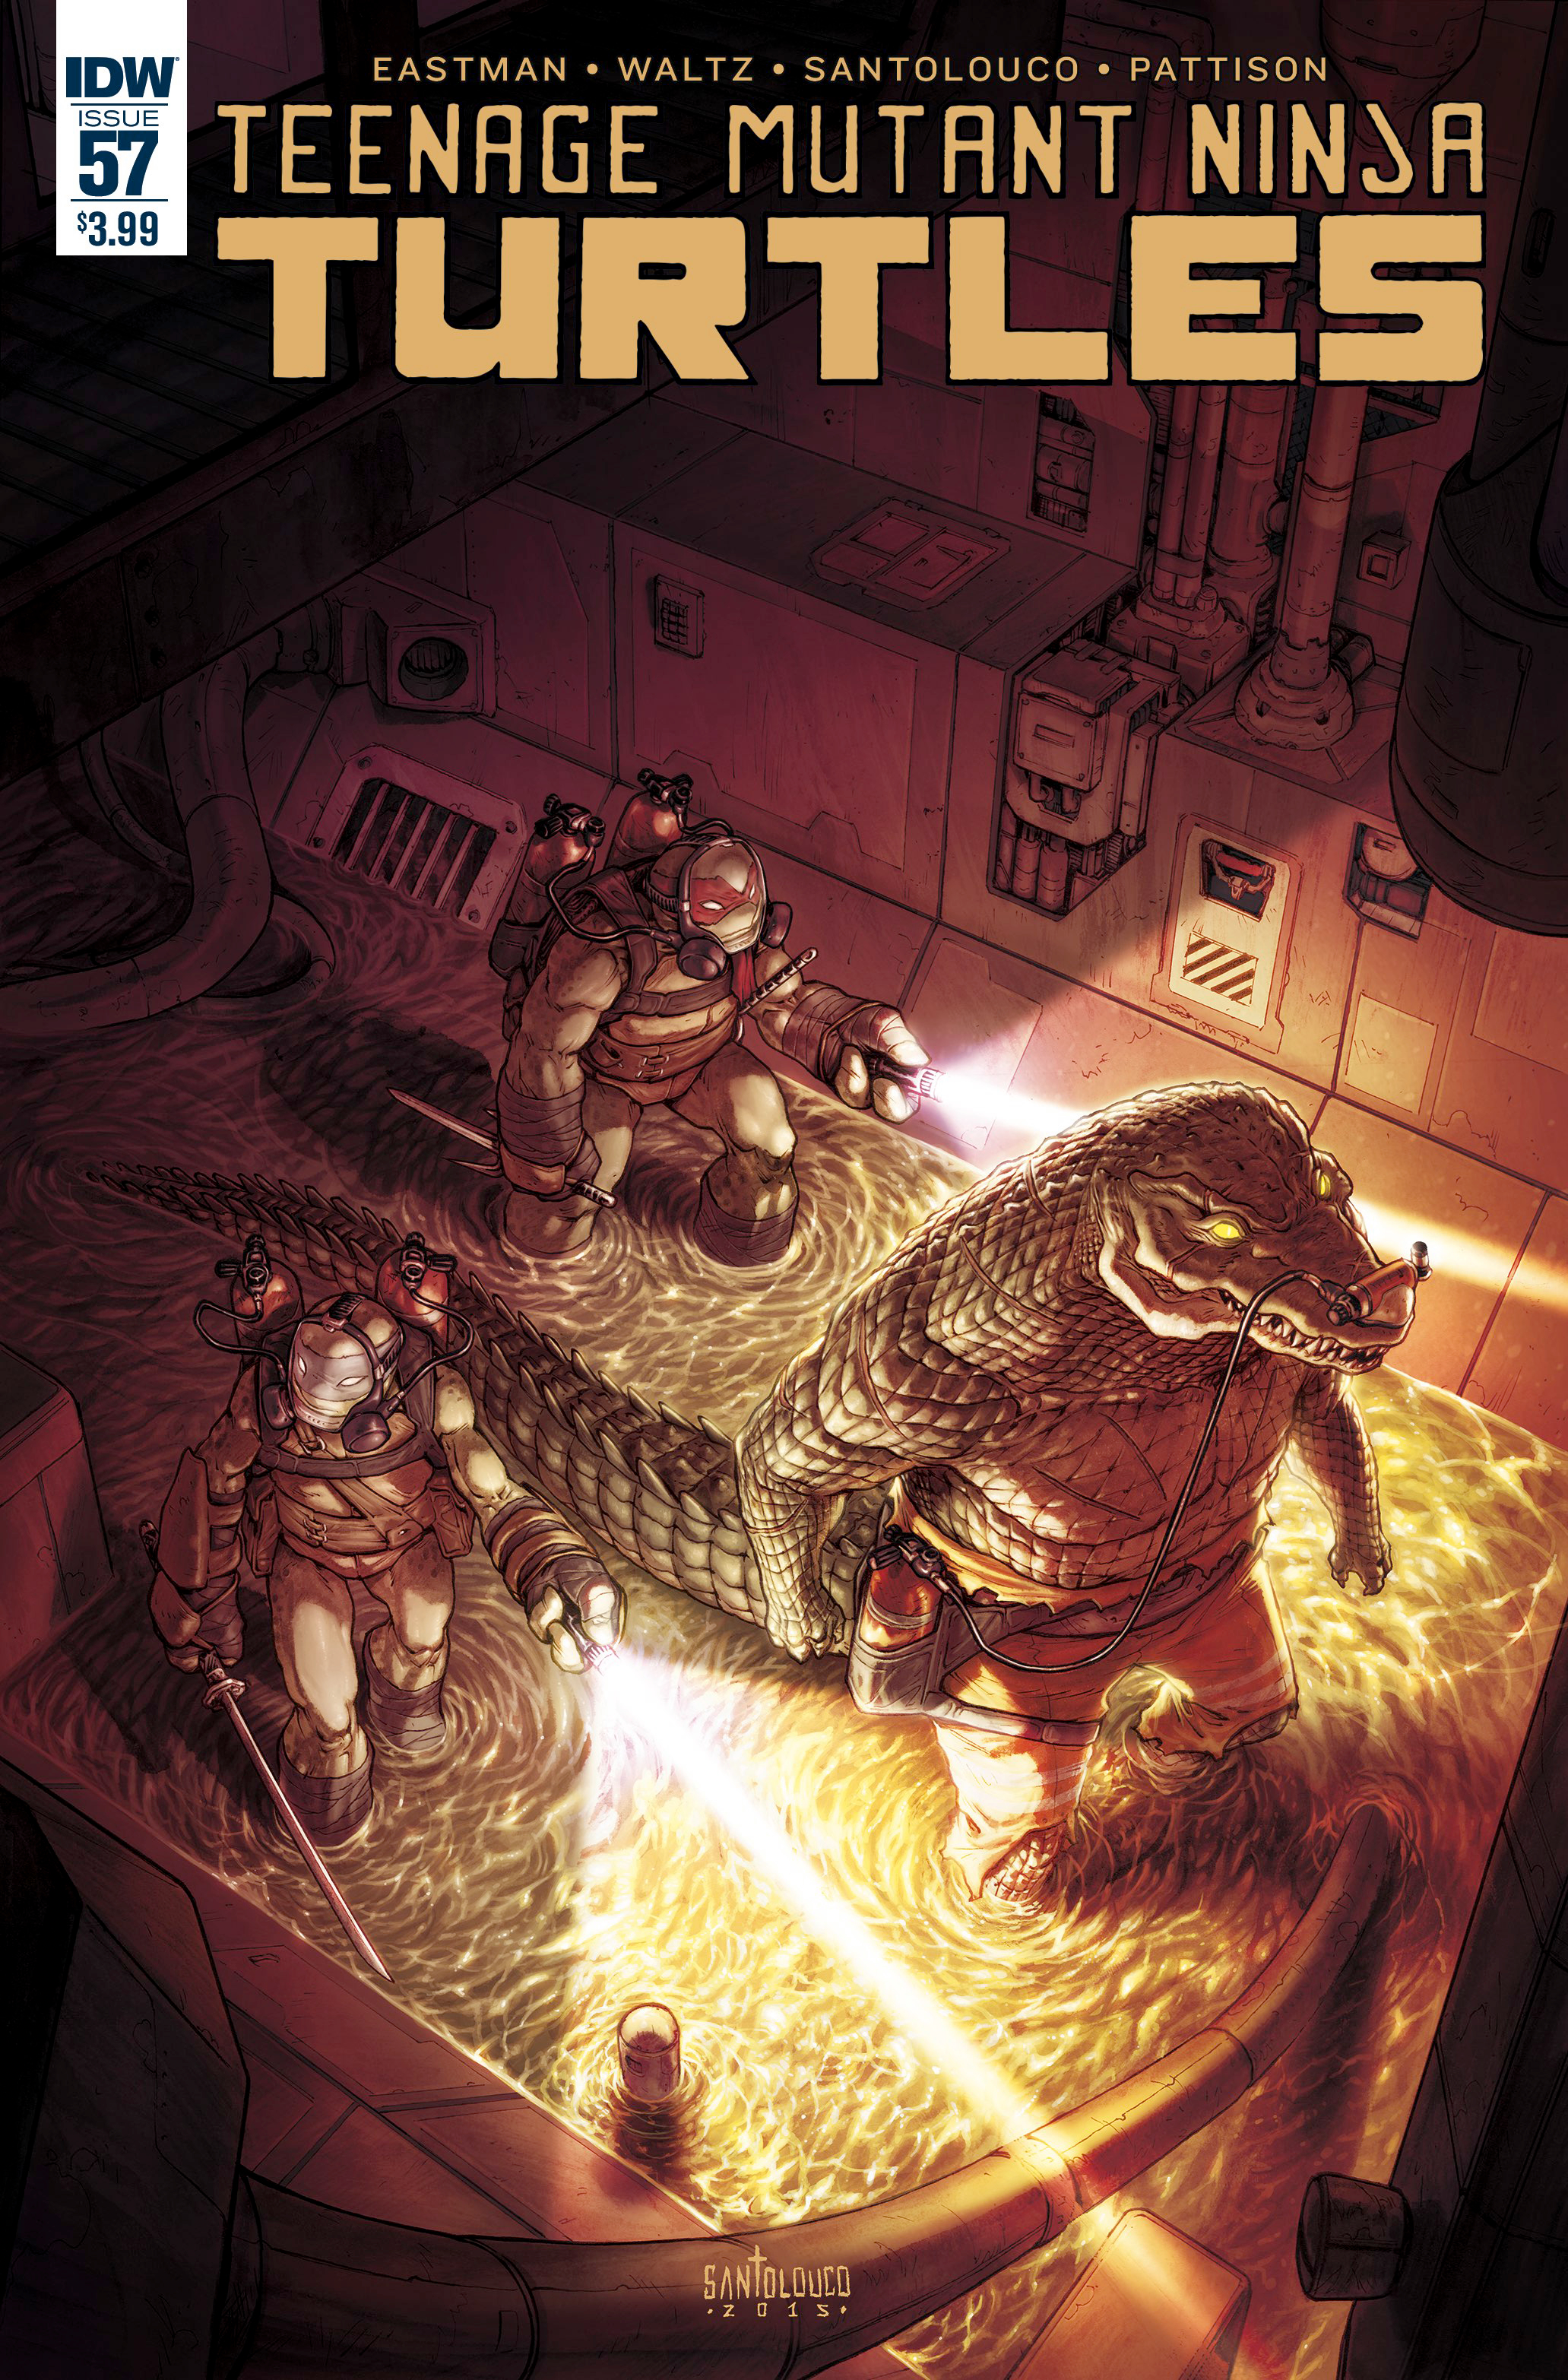 TMNT ONGOING #57